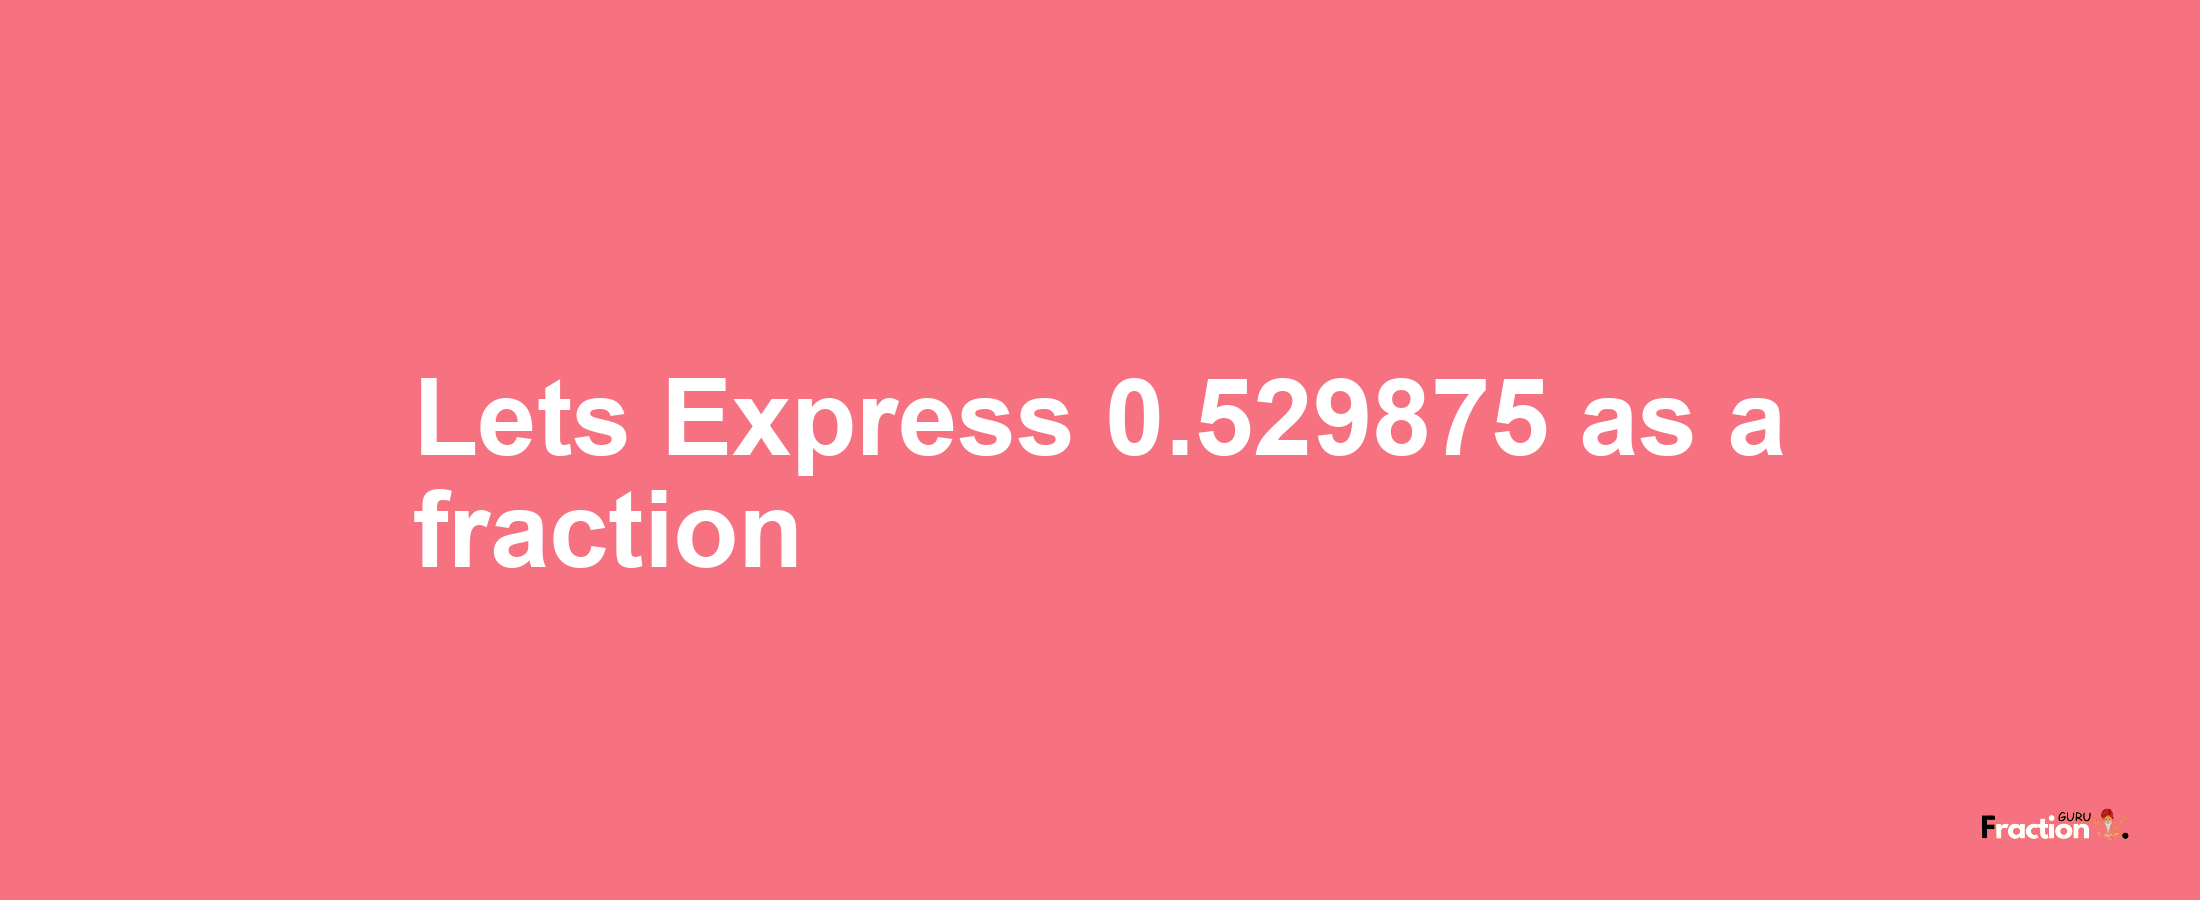 Lets Express 0.529875 as afraction